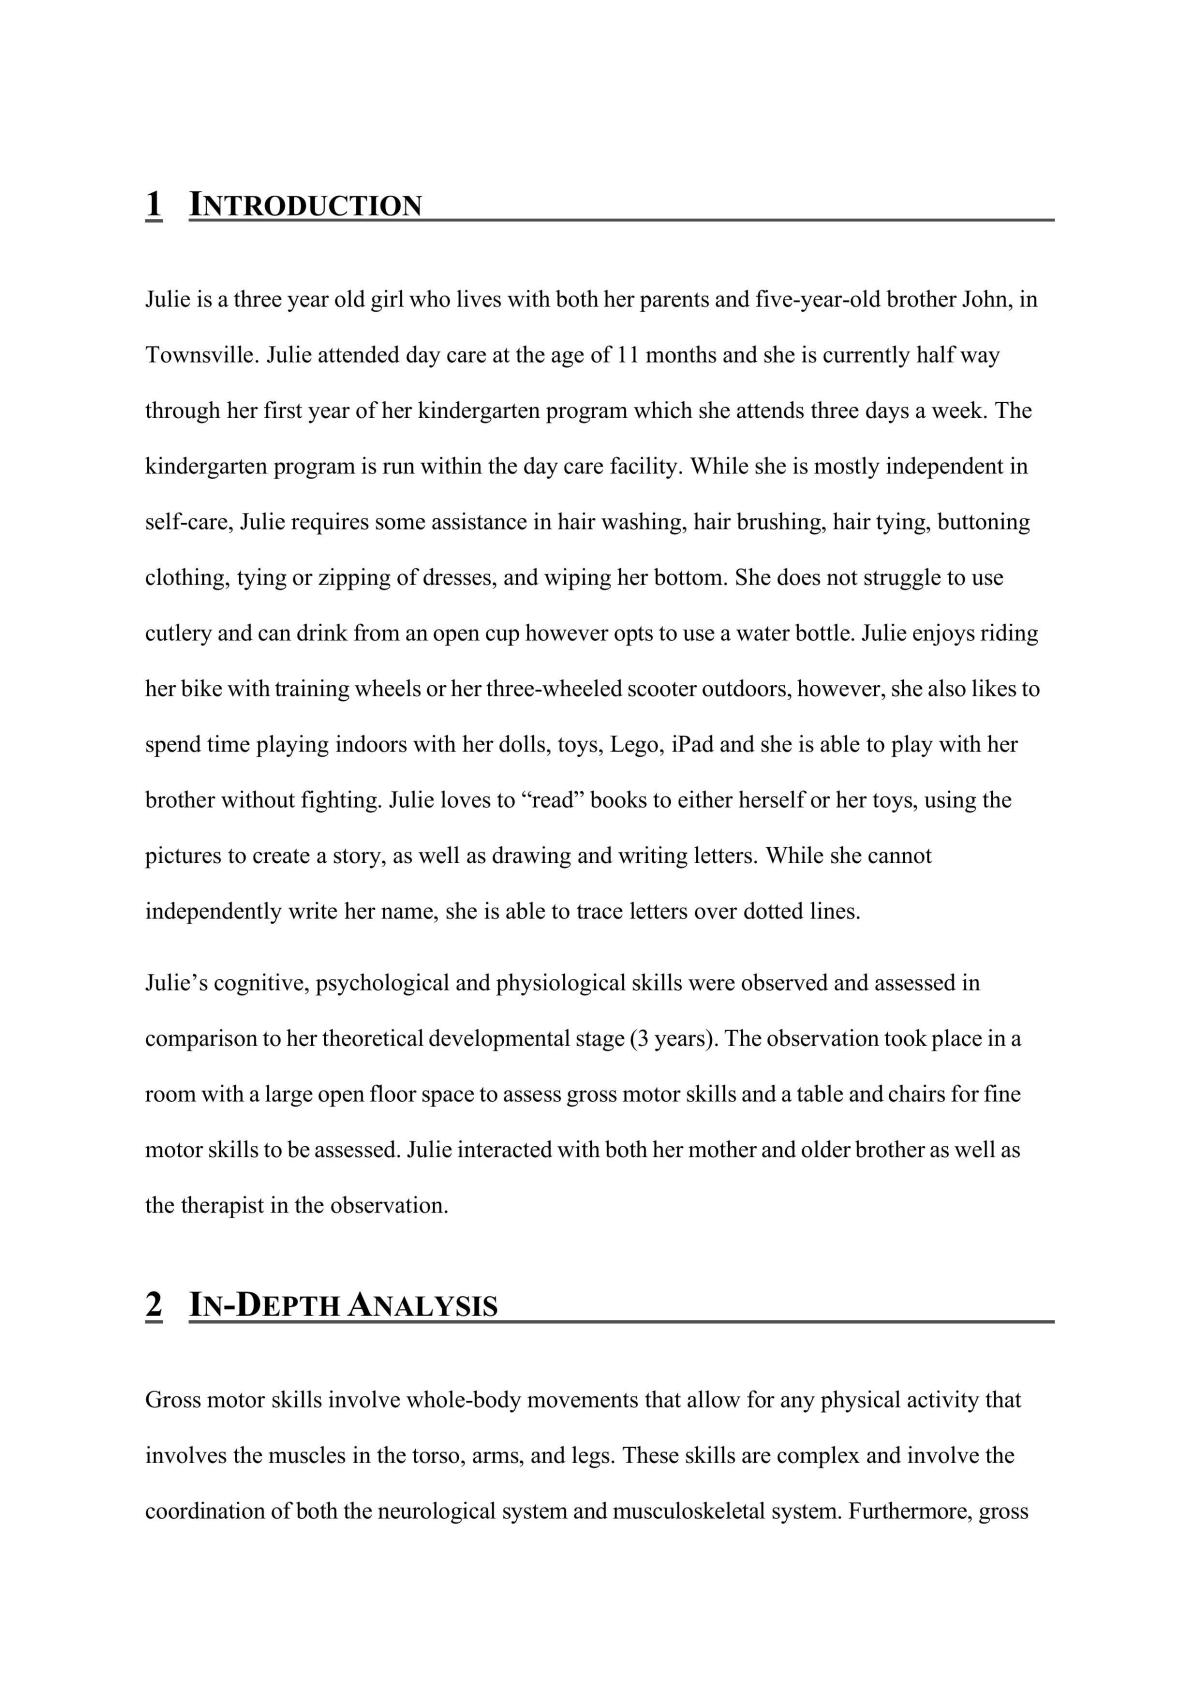 Case Study Analysis - Written Assignment - Page 1